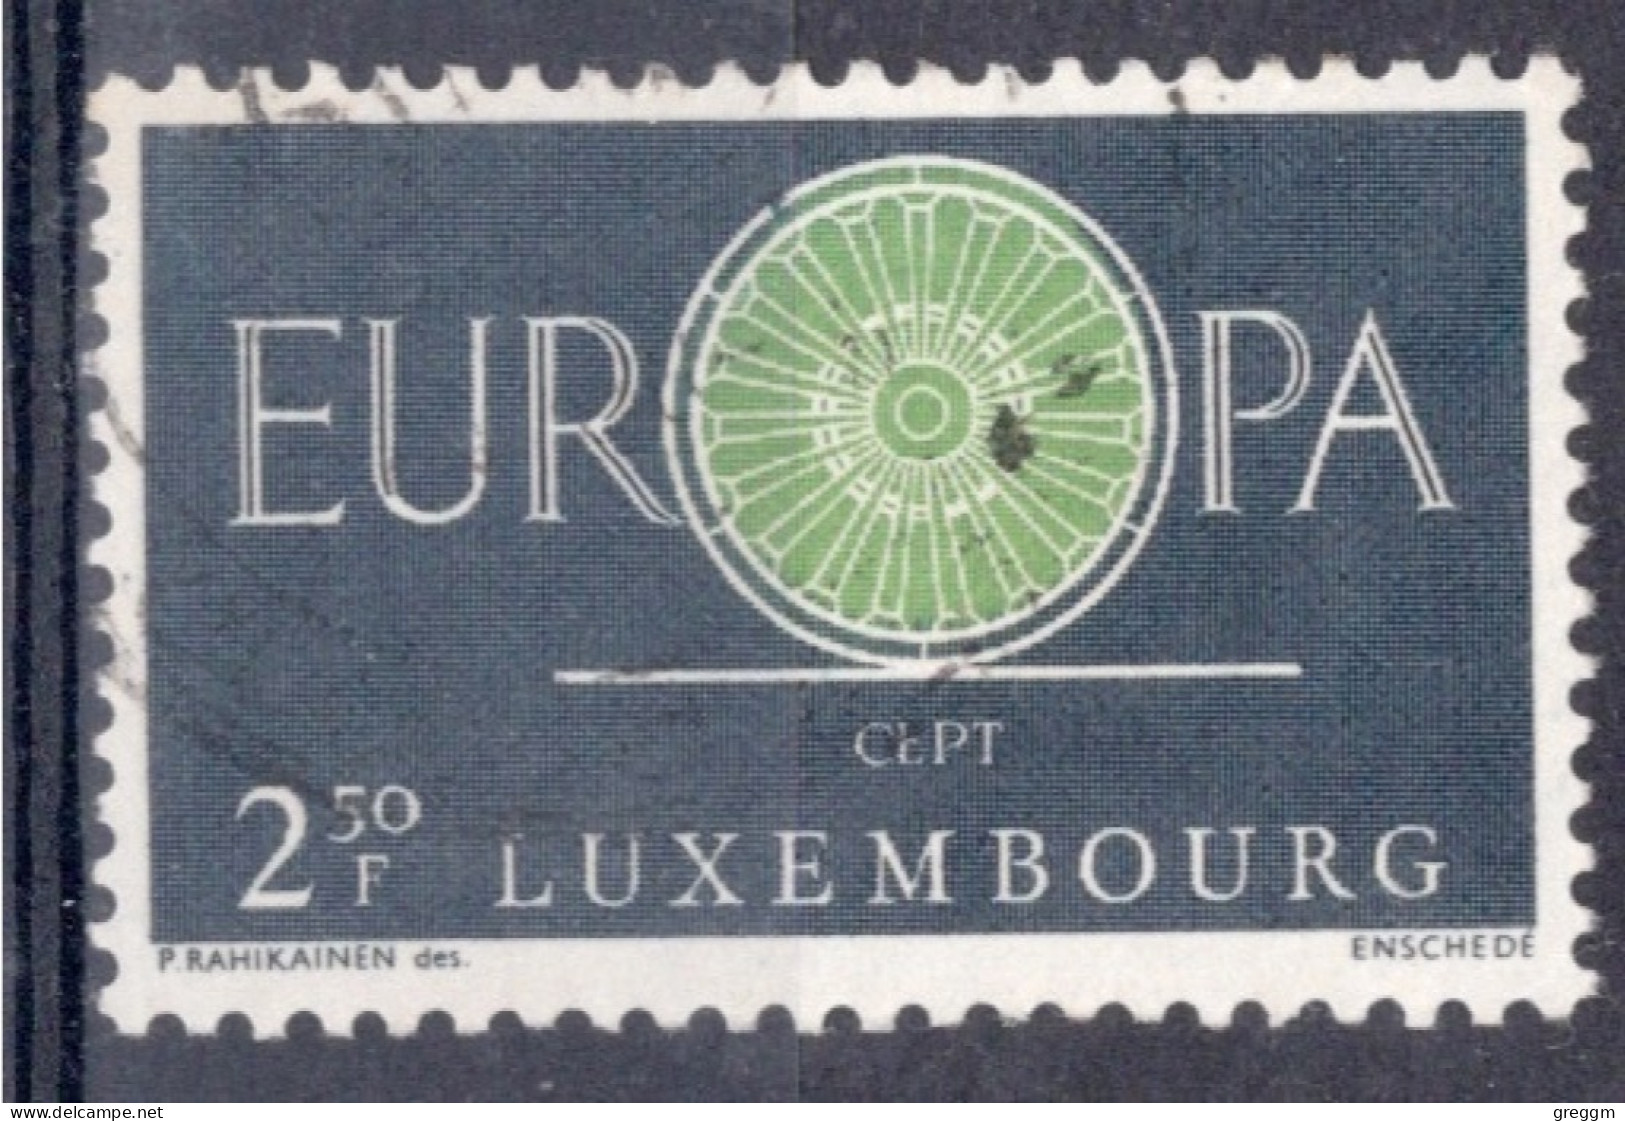 Luxembourg 1960  Single Stamp Issued To Celebrate EUROPA In Fine Used - Usati